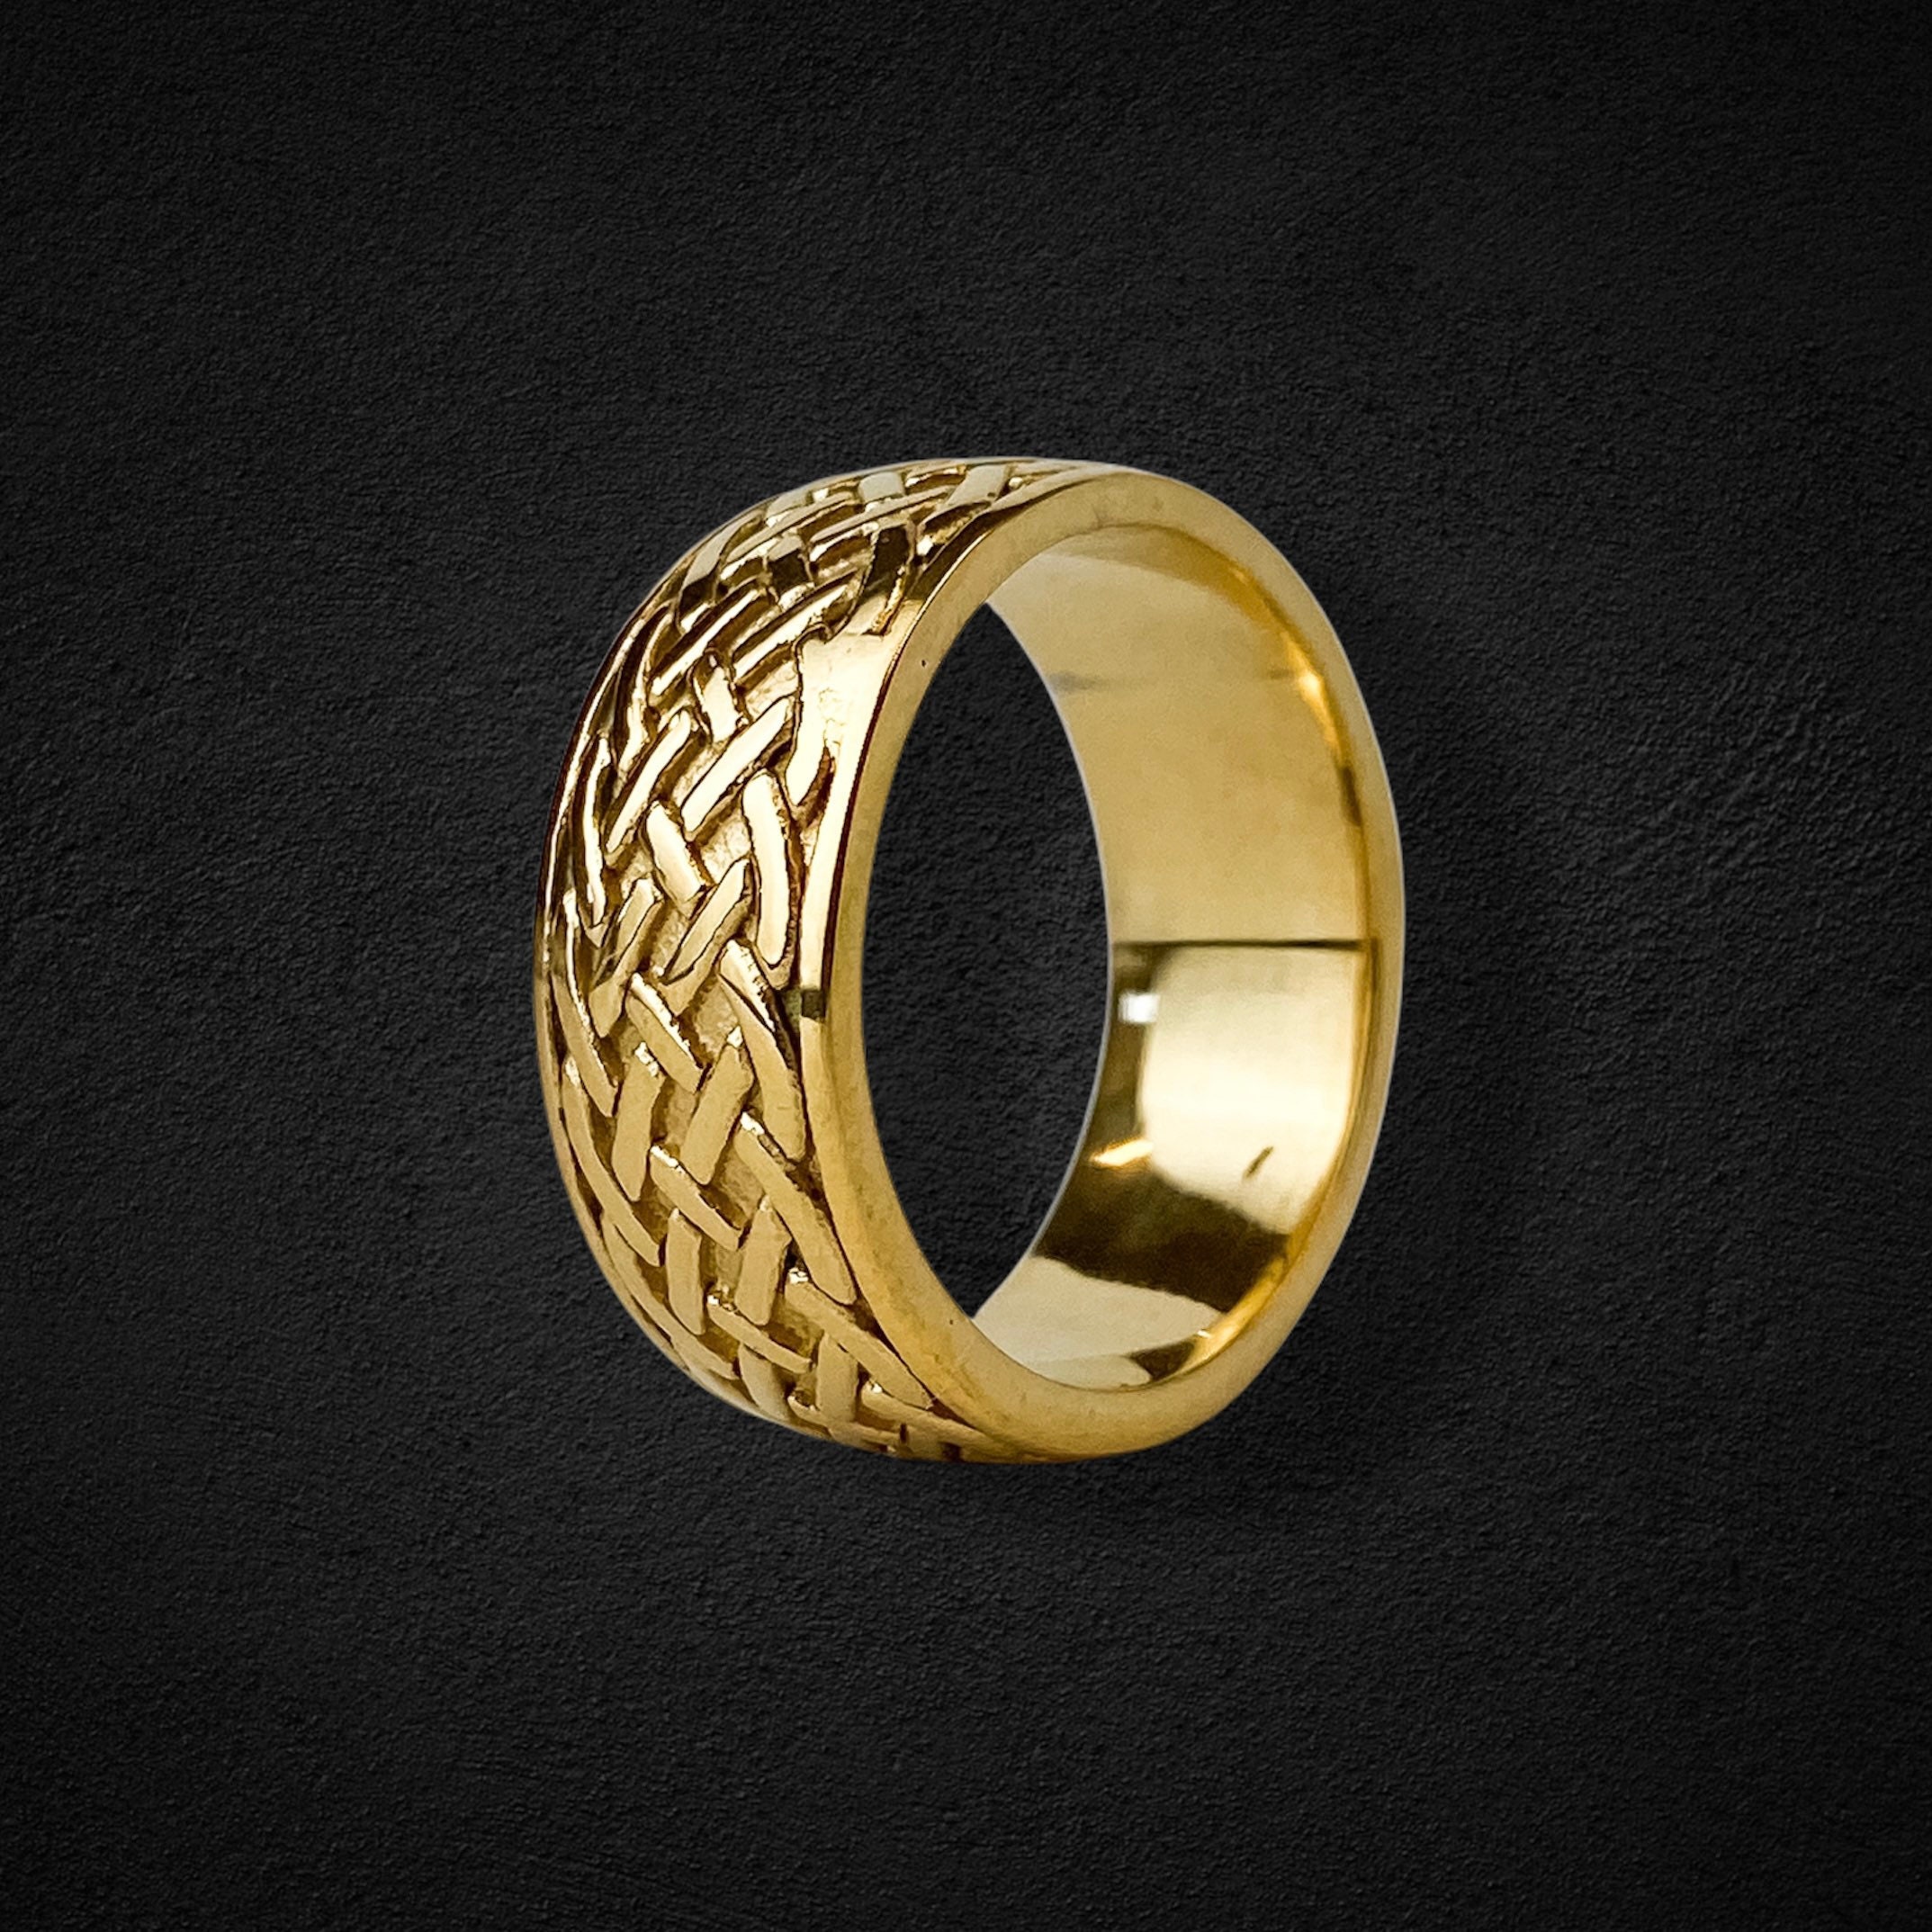 HAMMERED CELTIC RING Silver & 10k Gold Keith Jack Eternity Mens Ring